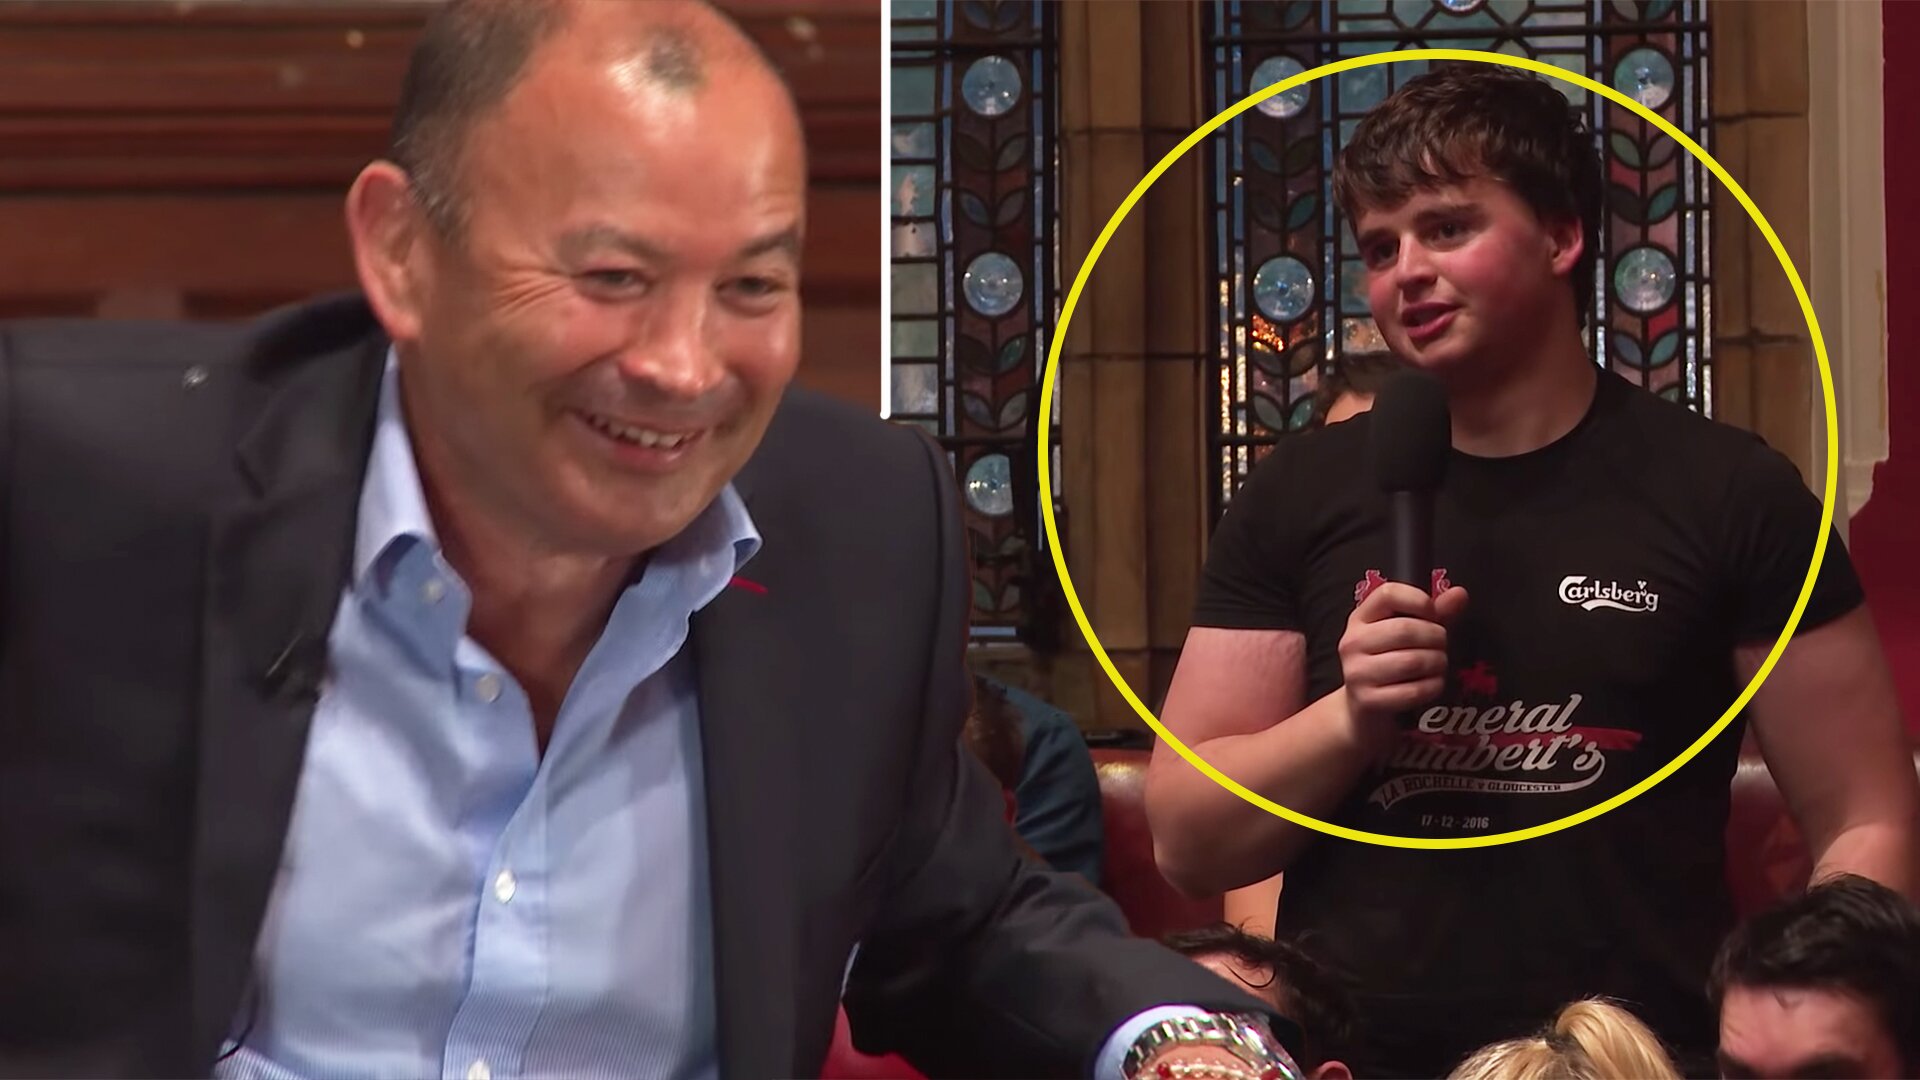 Footage emerges of England rugby coach mercilessly savaging university students in punchy Q&A